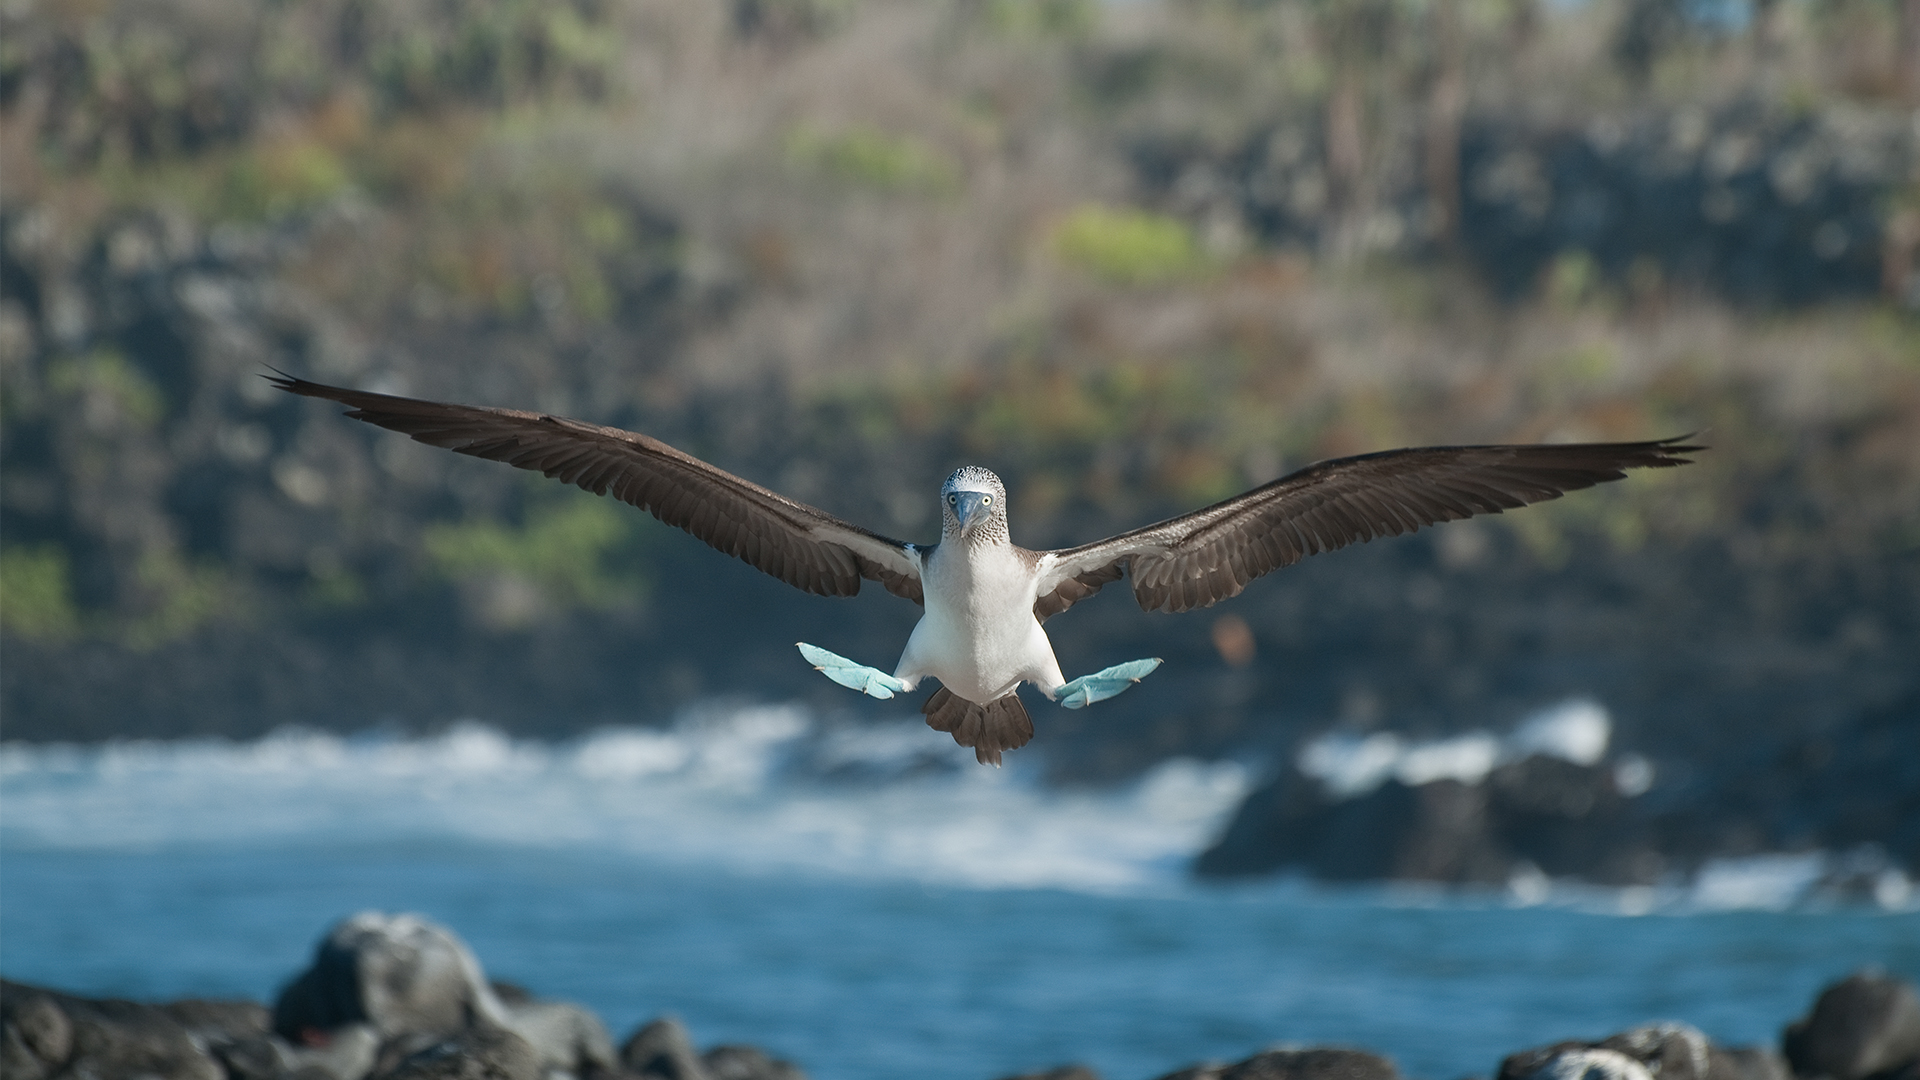 Blue-footed booby applying aero-brakes for landing. by Tui De Roy